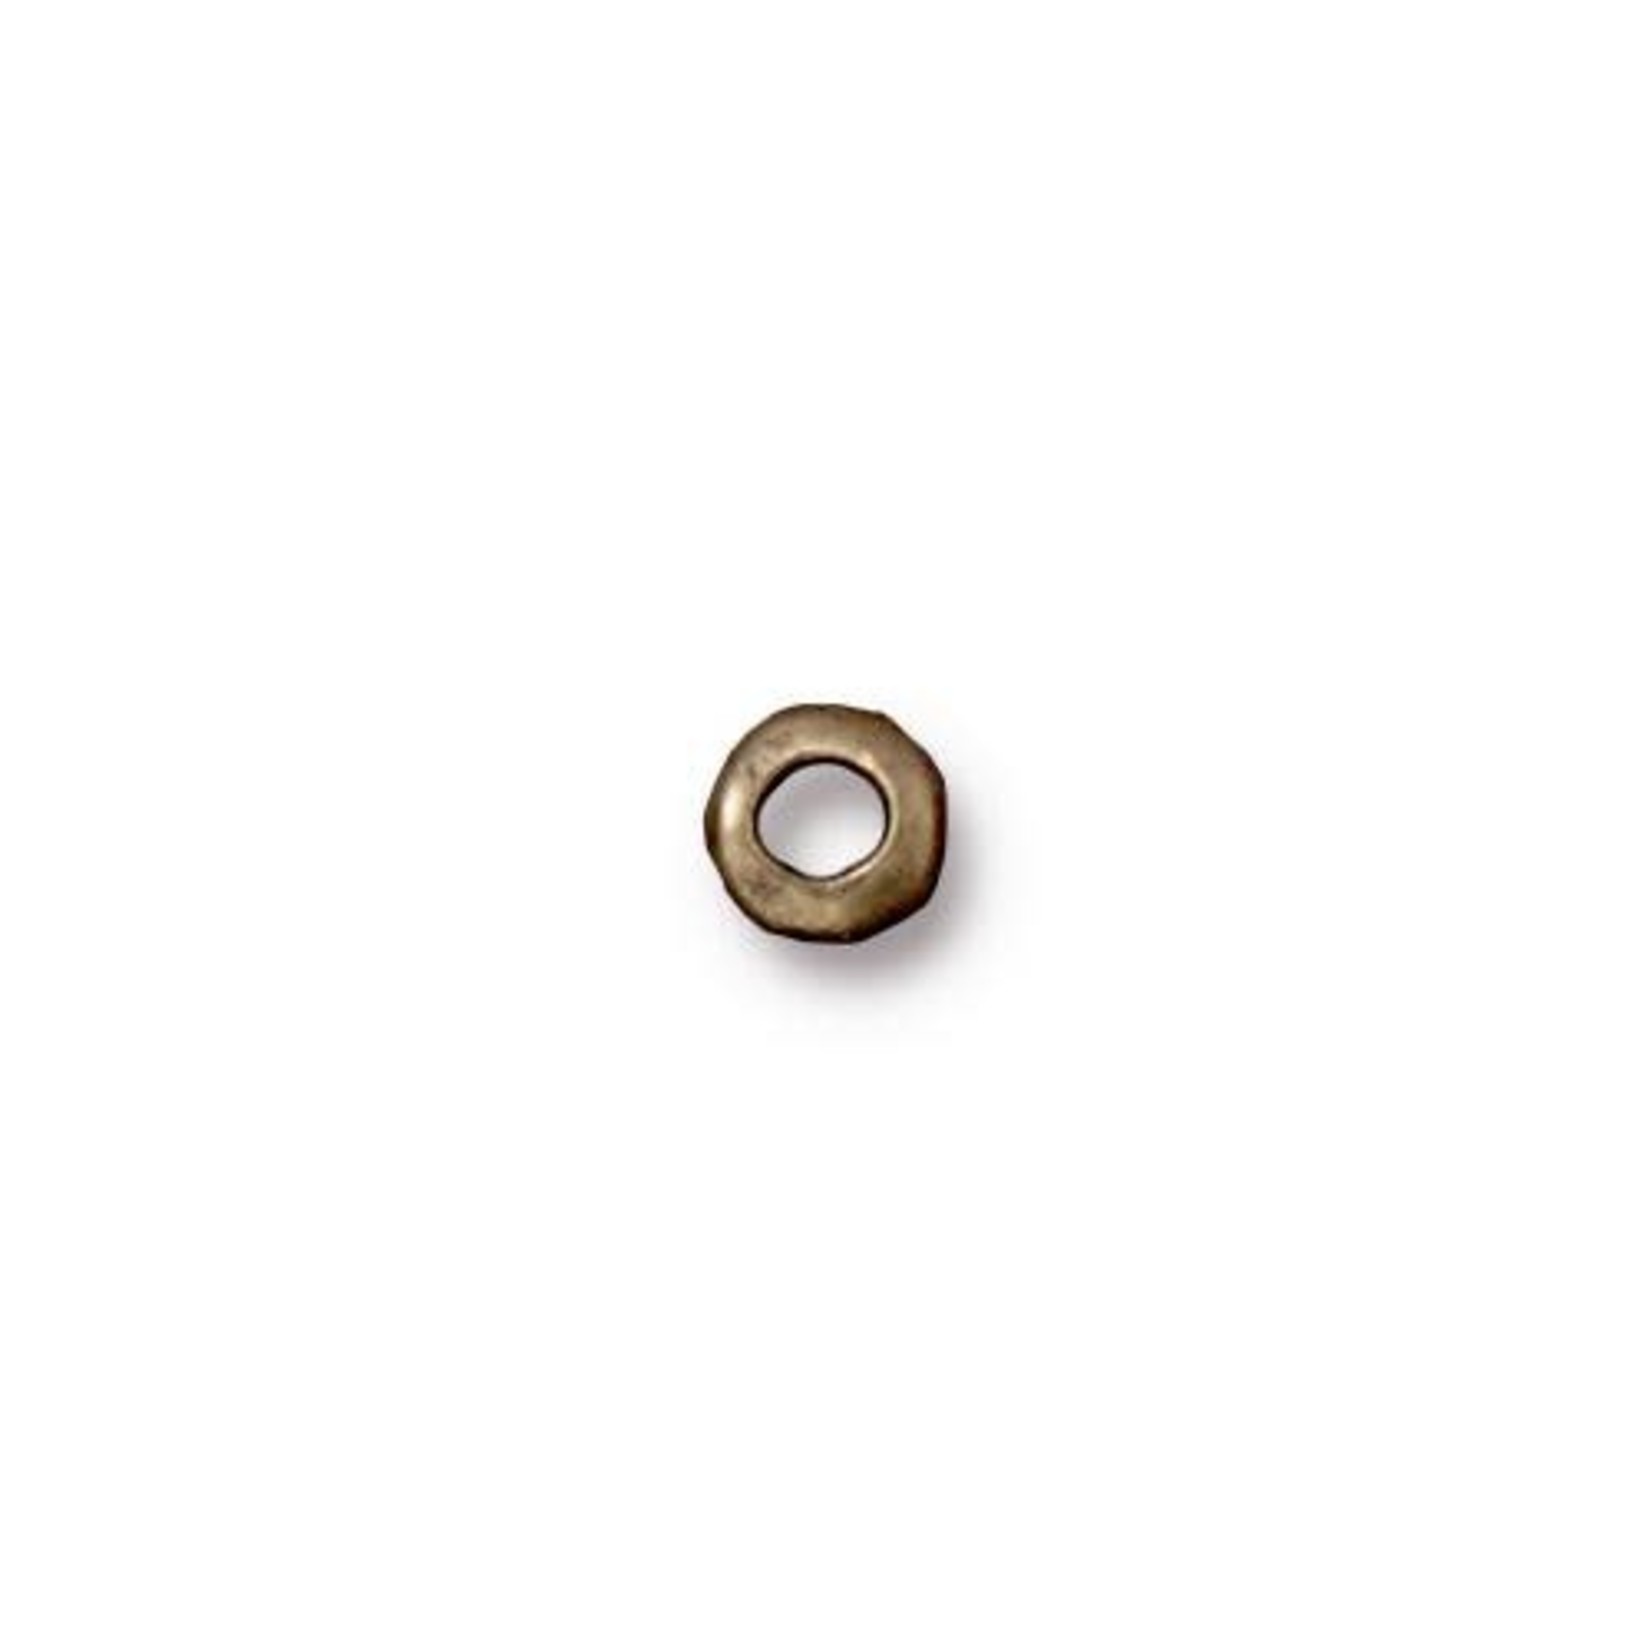 Tierracast Brass Oxide Plated 5mm Nugget Large Hole Spacer Bead - 100 pieces